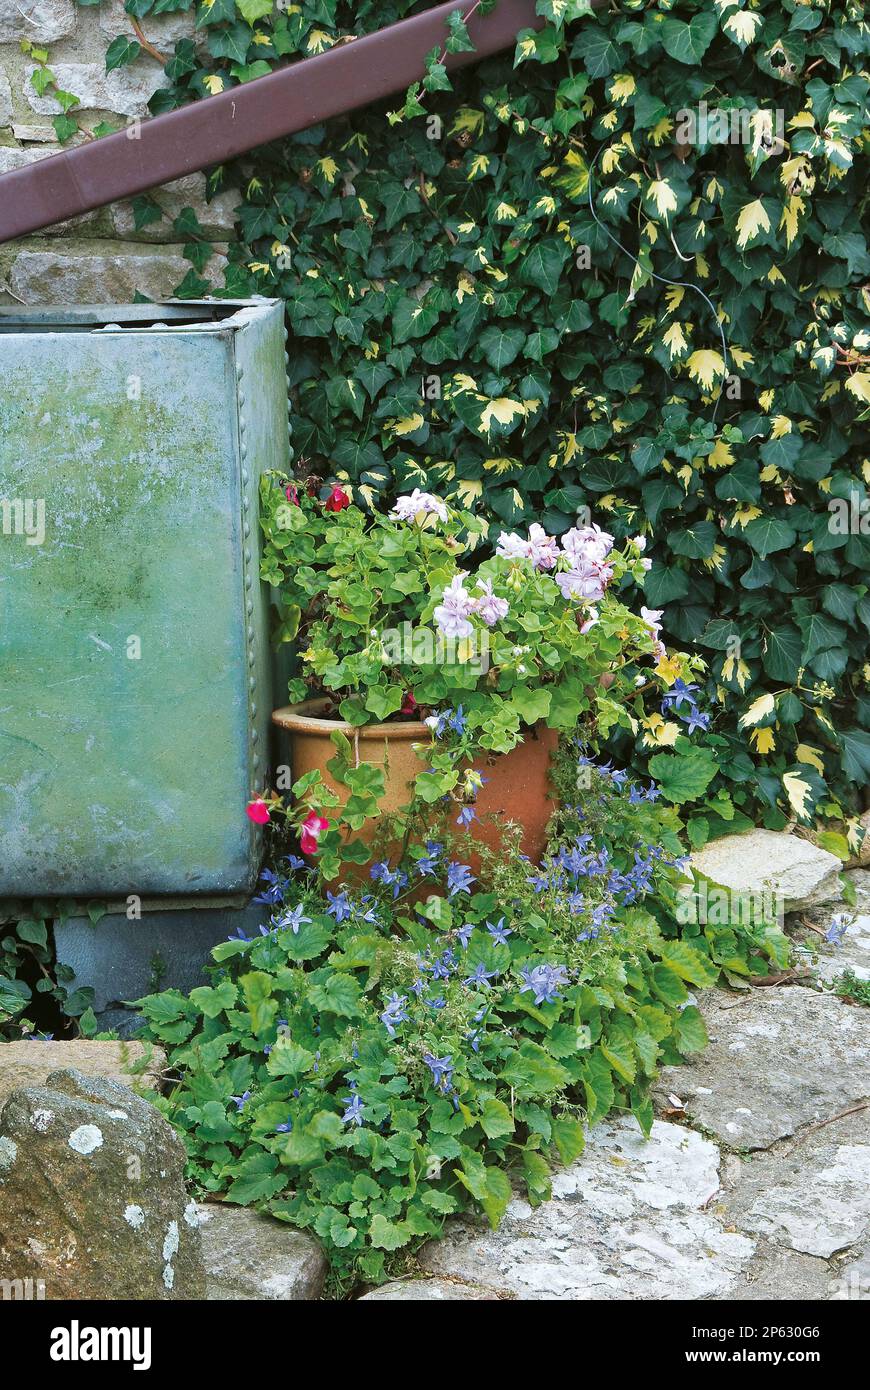 flowers and terracotta pot by verdigris water tank in country garden Stock Photo